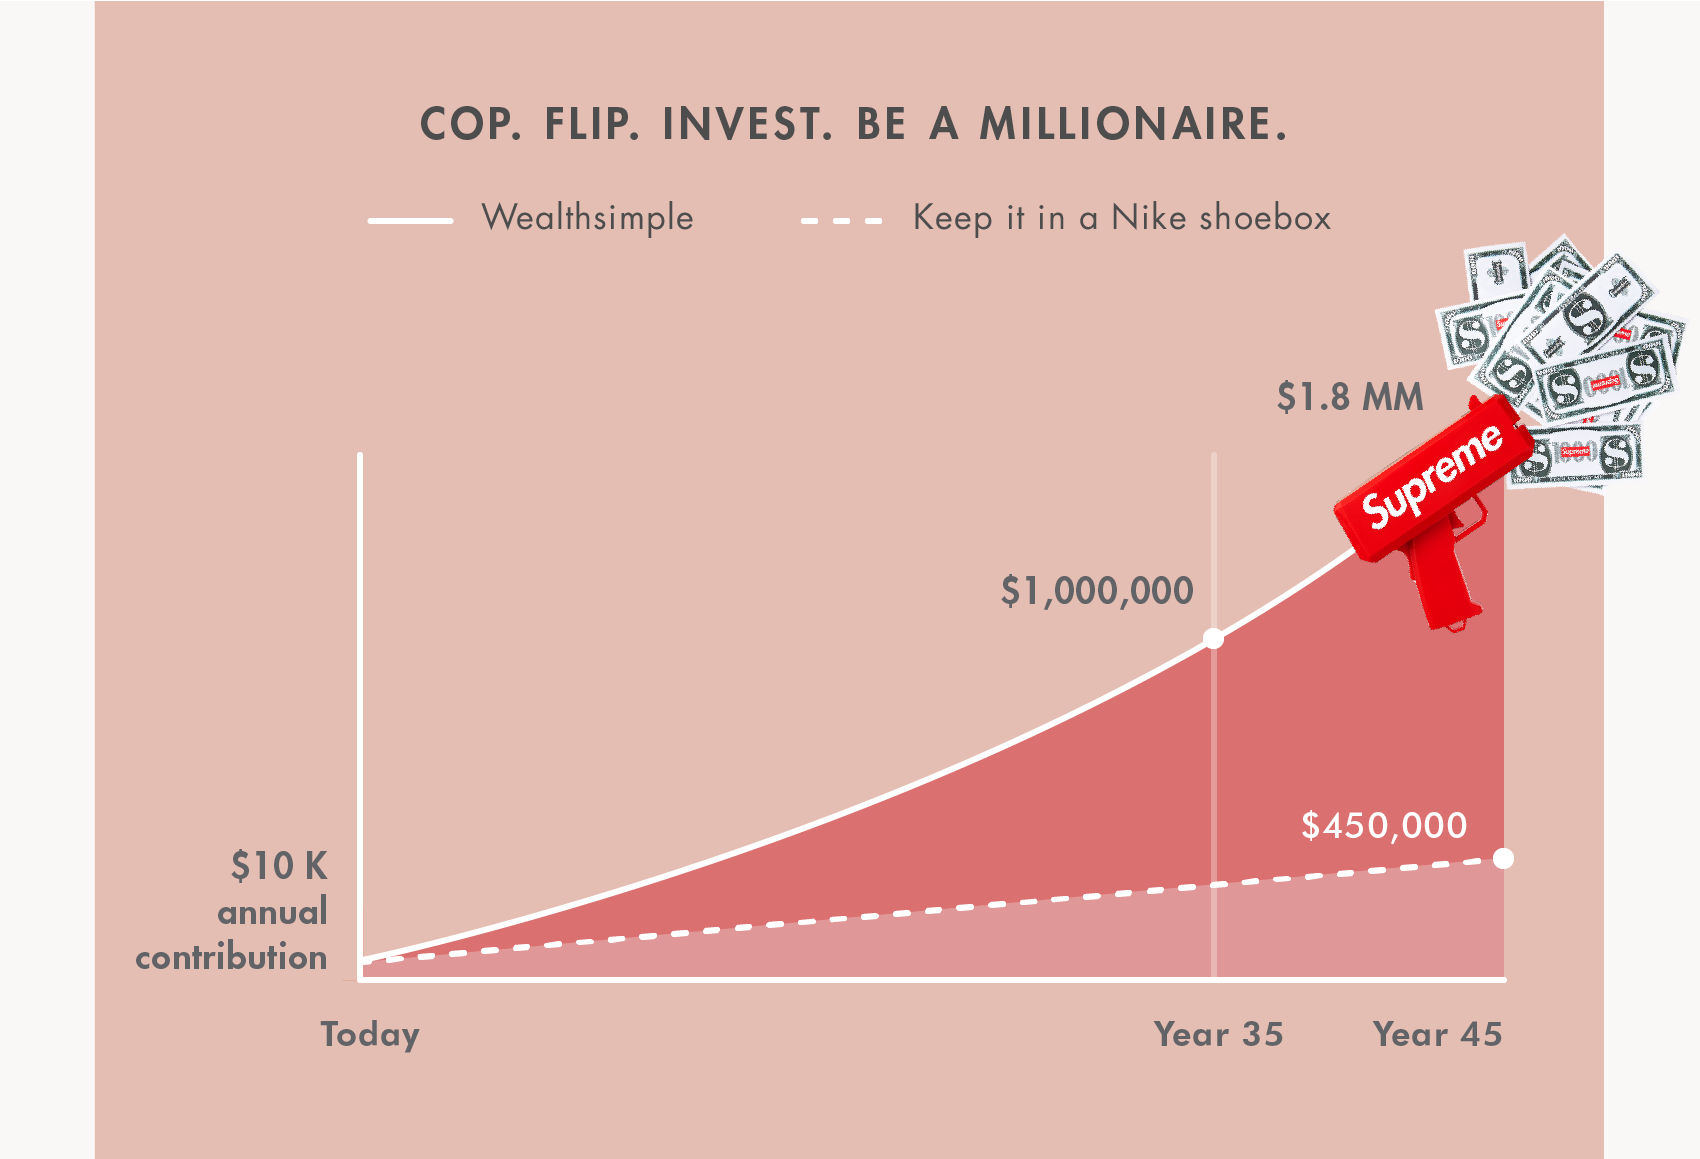 Graph showing how investing in Supreme clothing could make you a millionaire